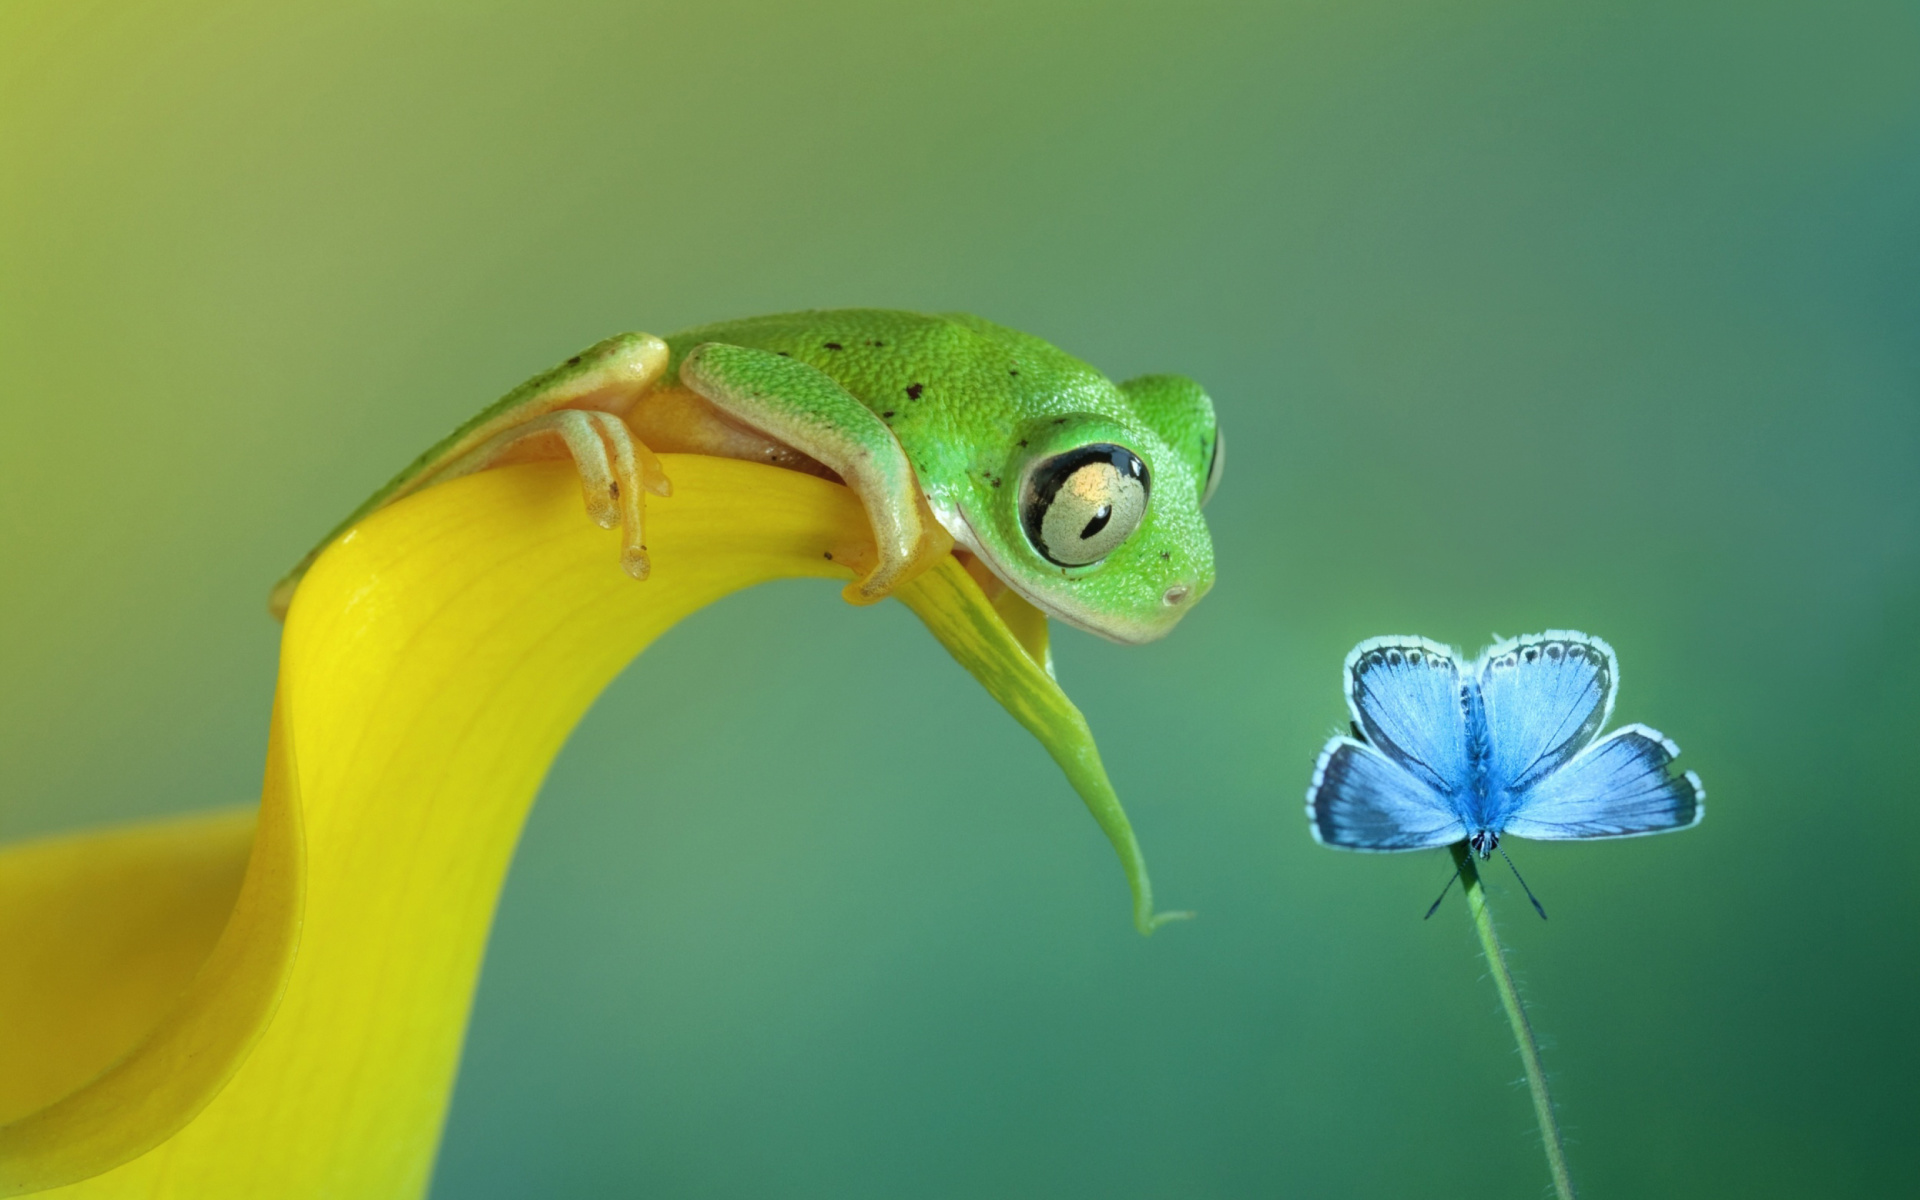 Frog and butterfly wallpaper 1920x1200